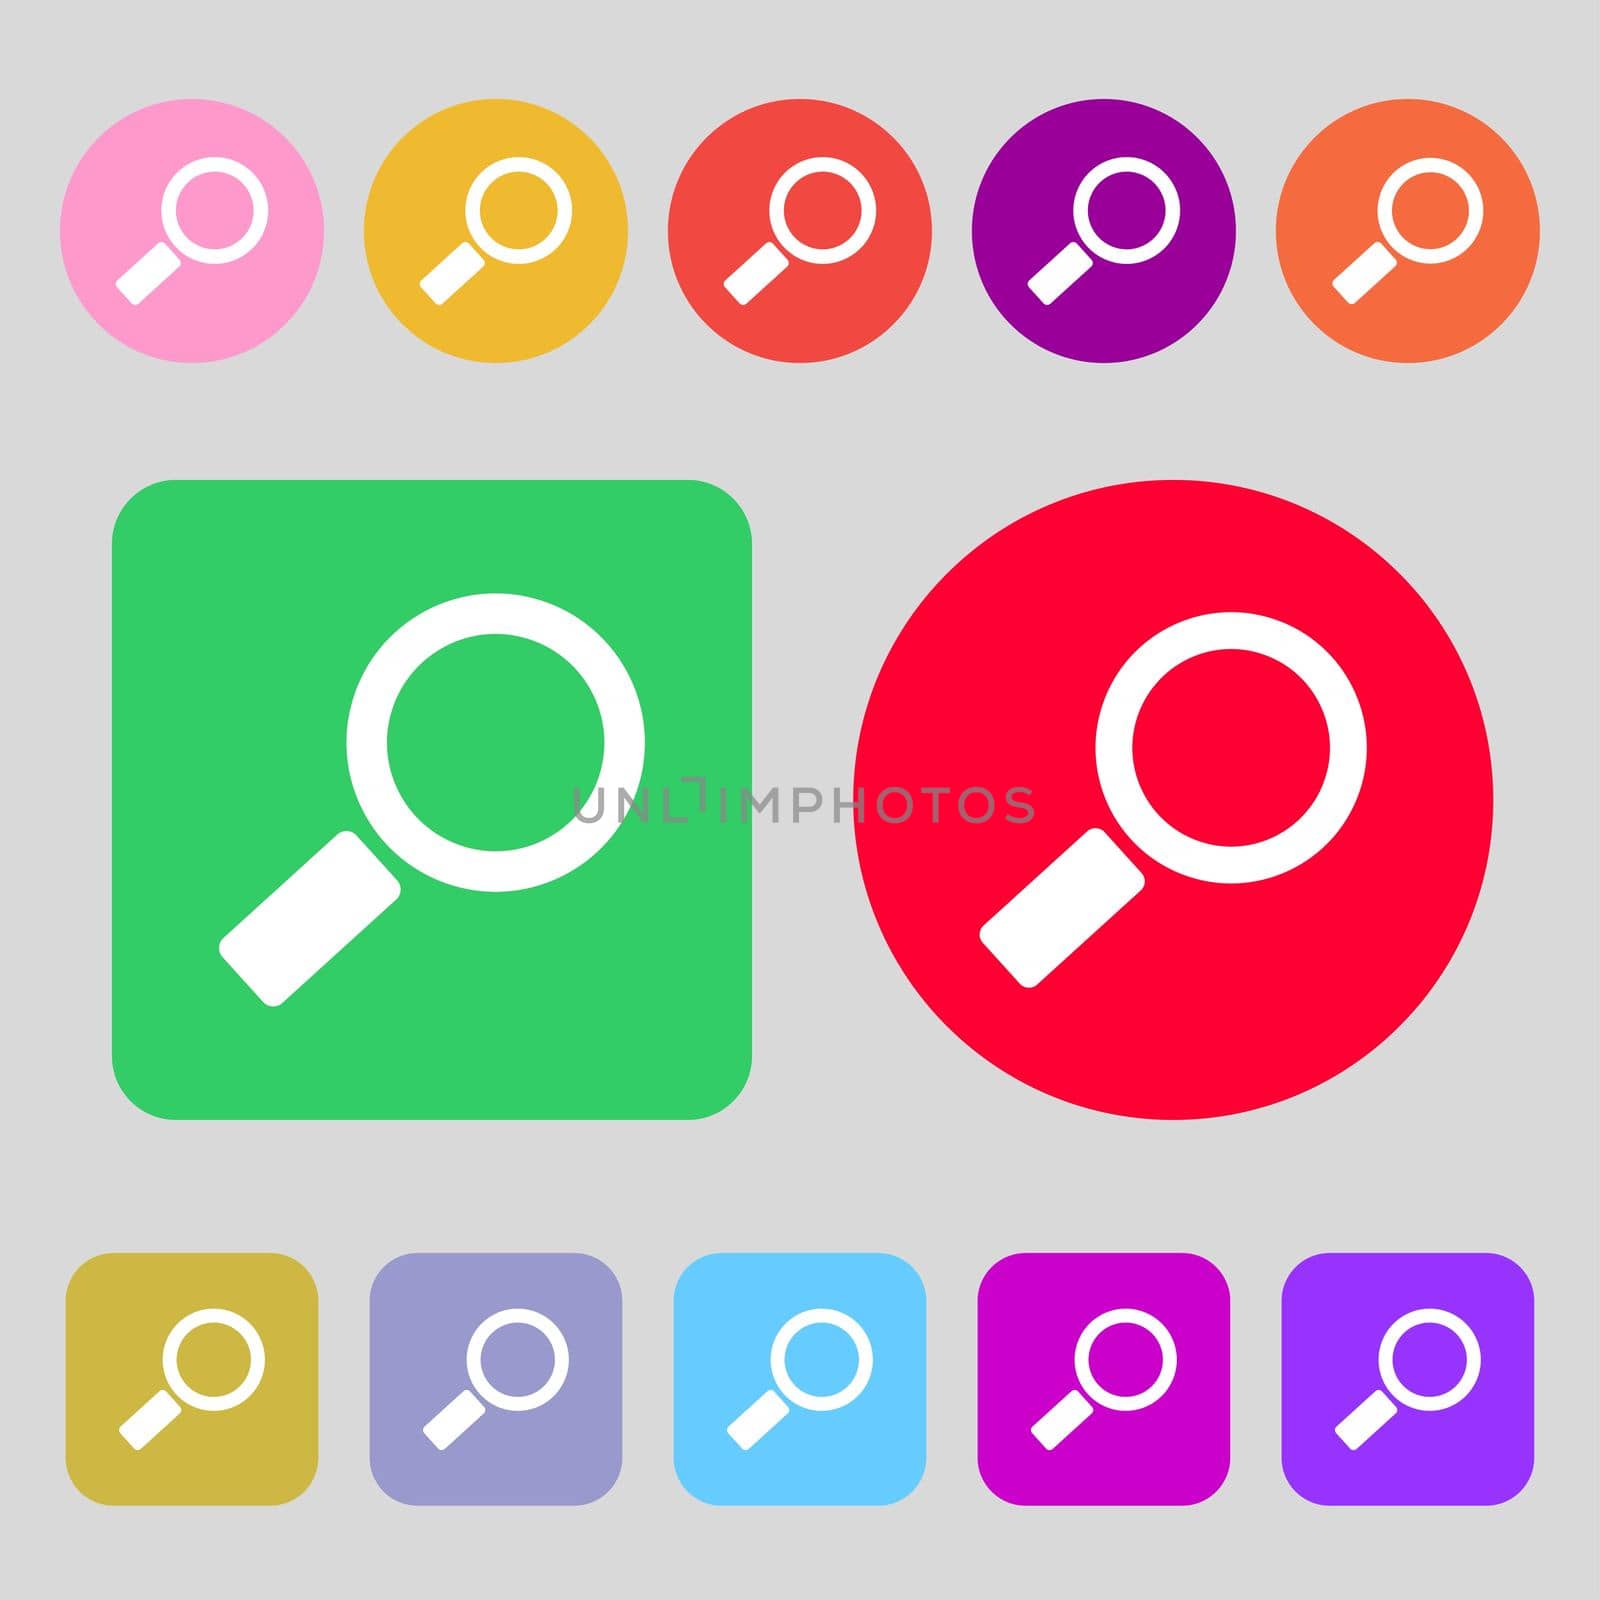 Magnifier glass sign icon. Zoom tool button. Navigation search symbol.12 colored buttons. Flat design. illustration